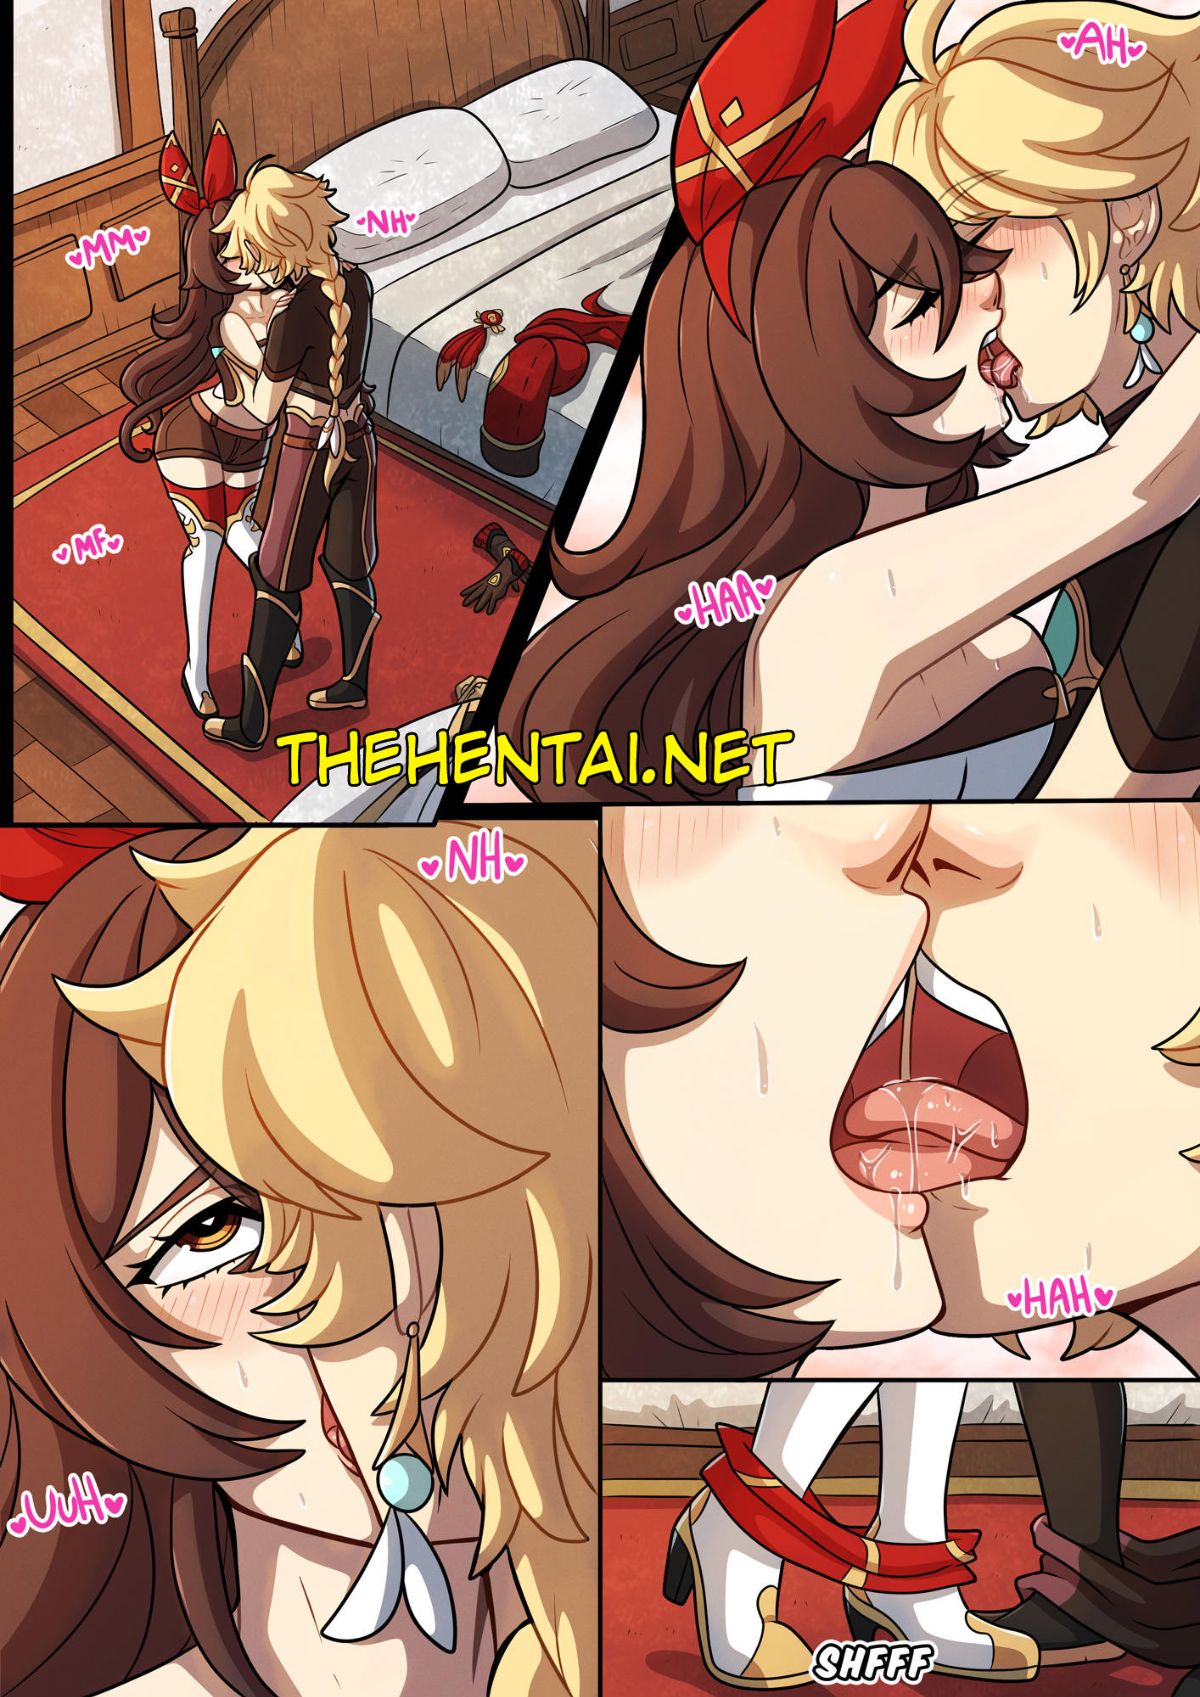 The Travelers Guide to Teyvats Heart - Amber Hentai pt-br 09